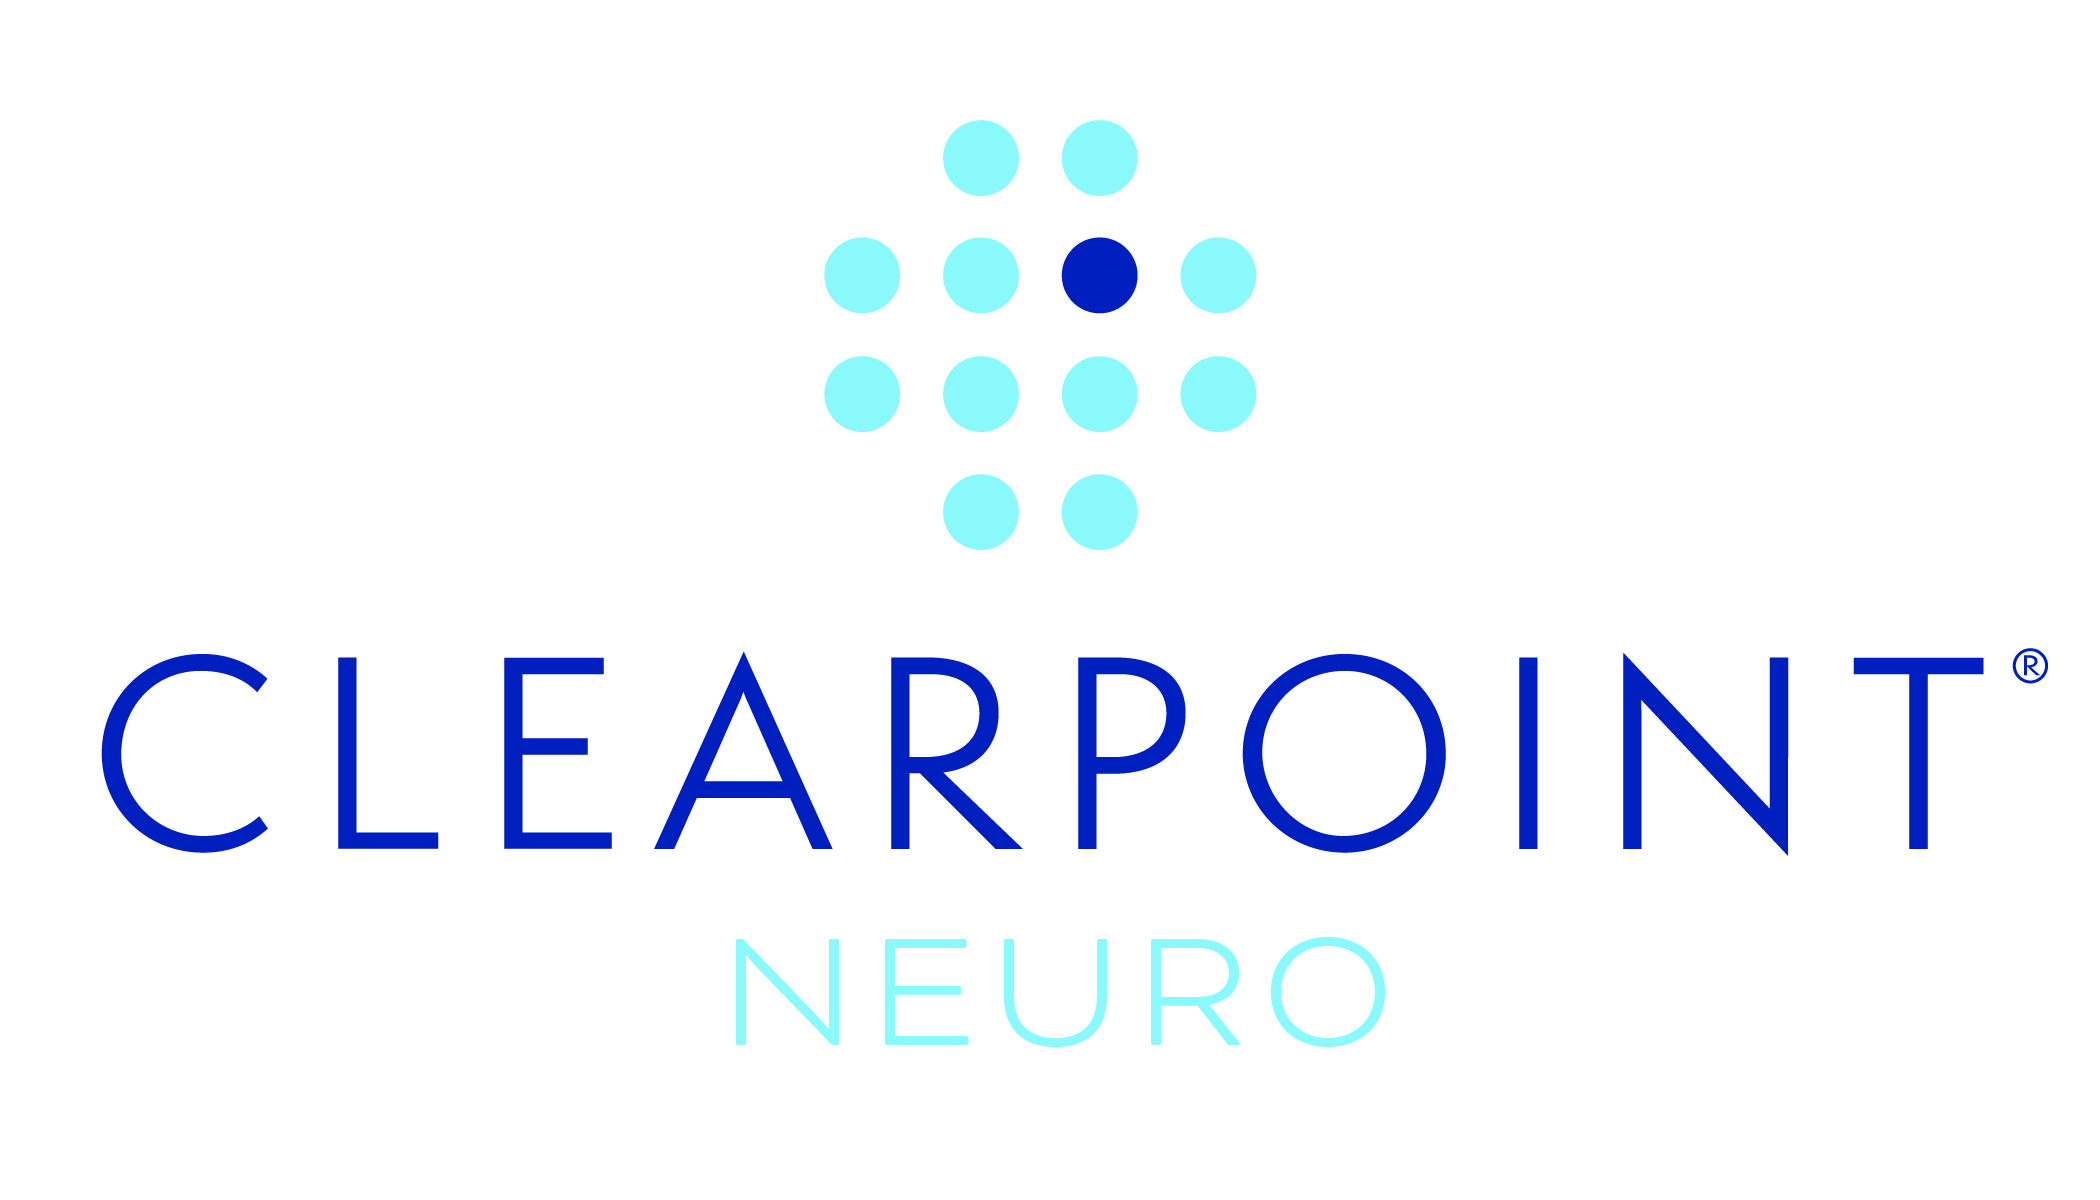 ClearPoint Neuro Announces Exclusive Multi-Year Licensing Agreement with UCSF for Innovative Intra-Cerebral Cellular Delivery Platform